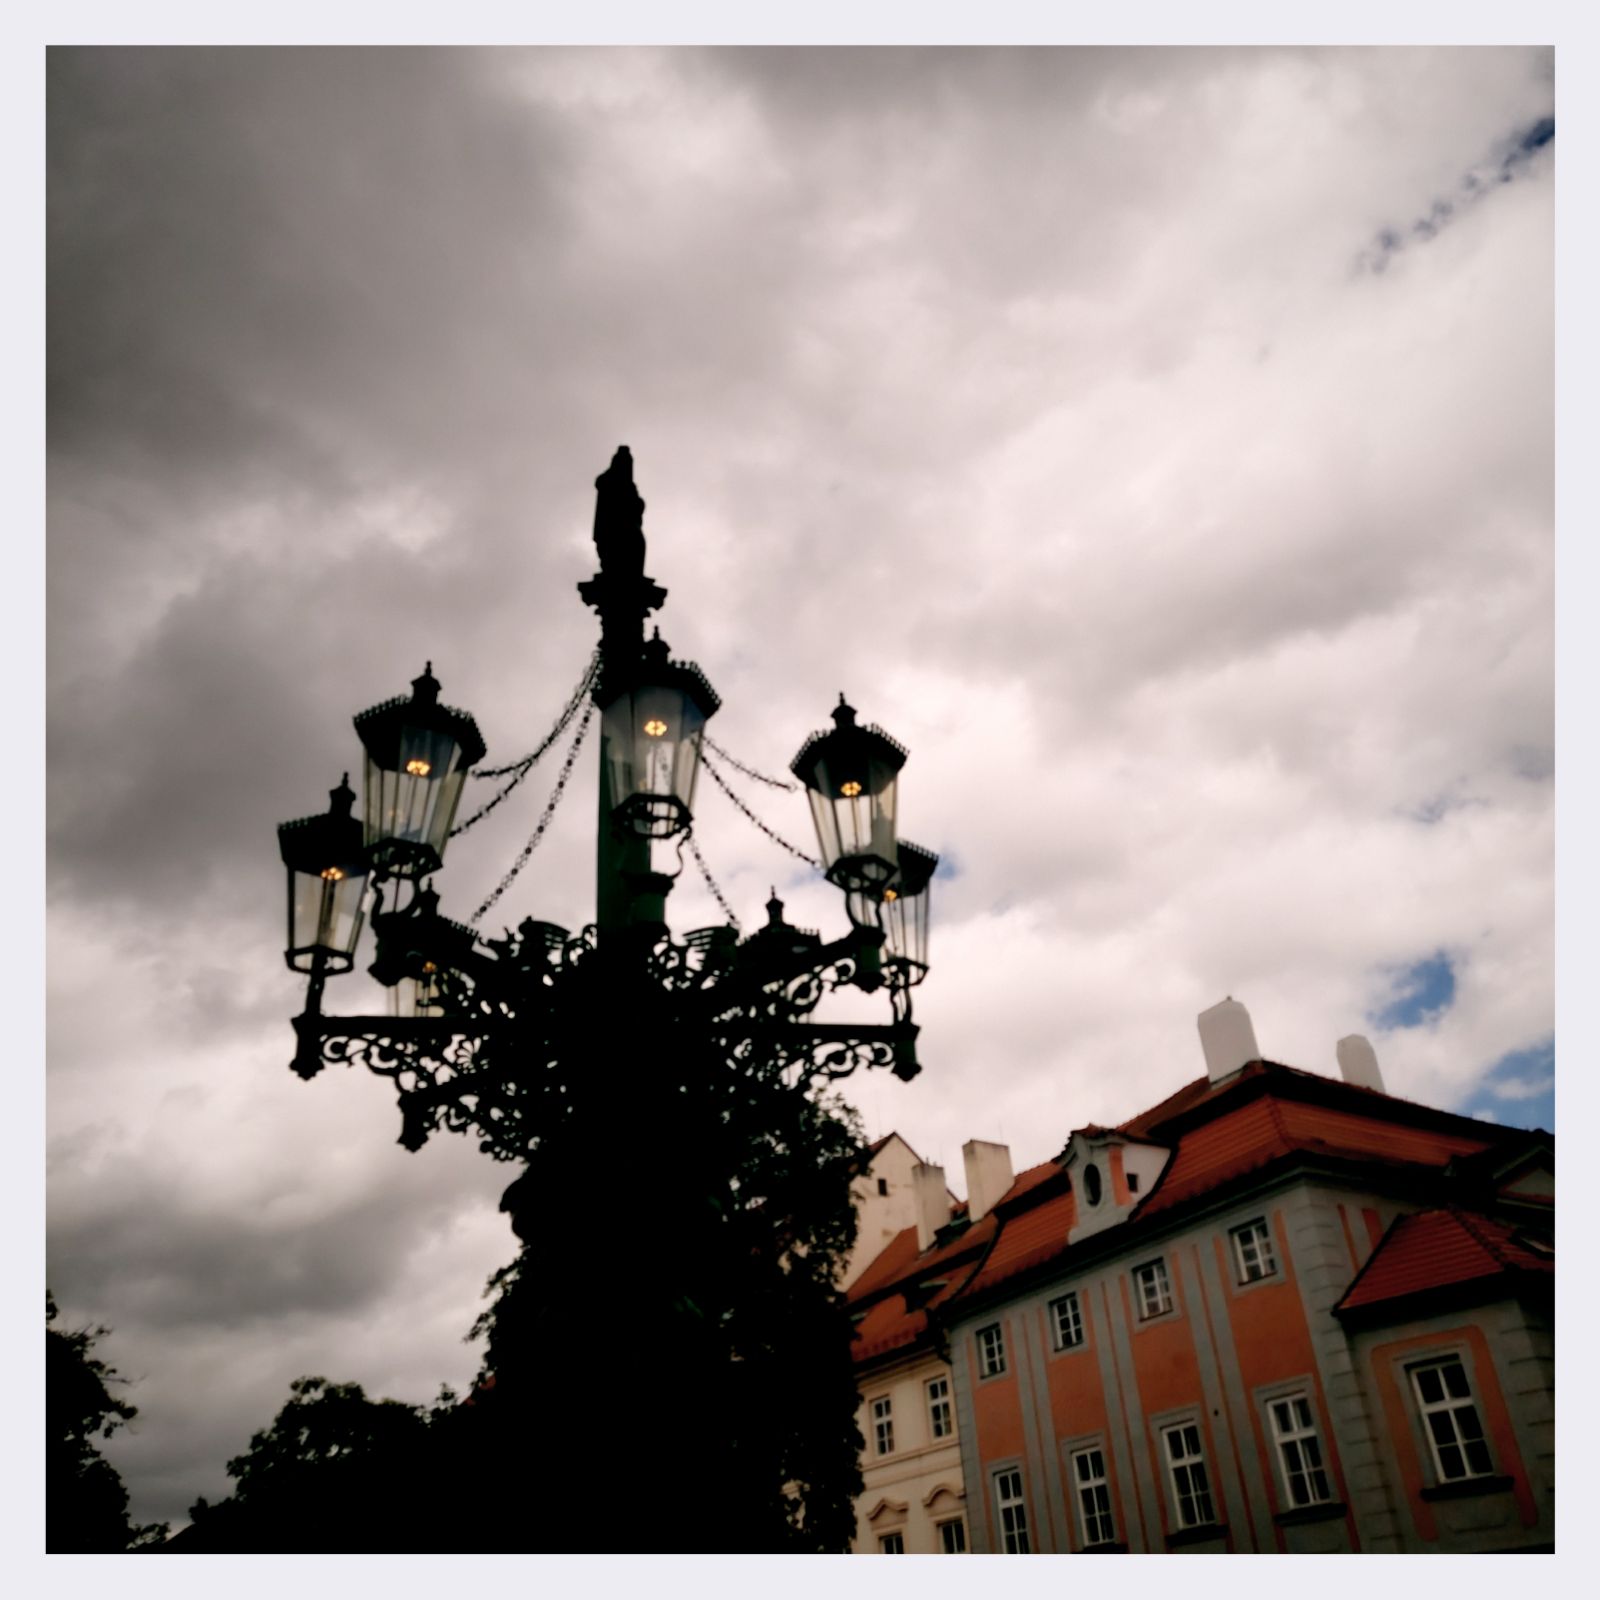 A seven-flame public lantern, a house and grey clouds.